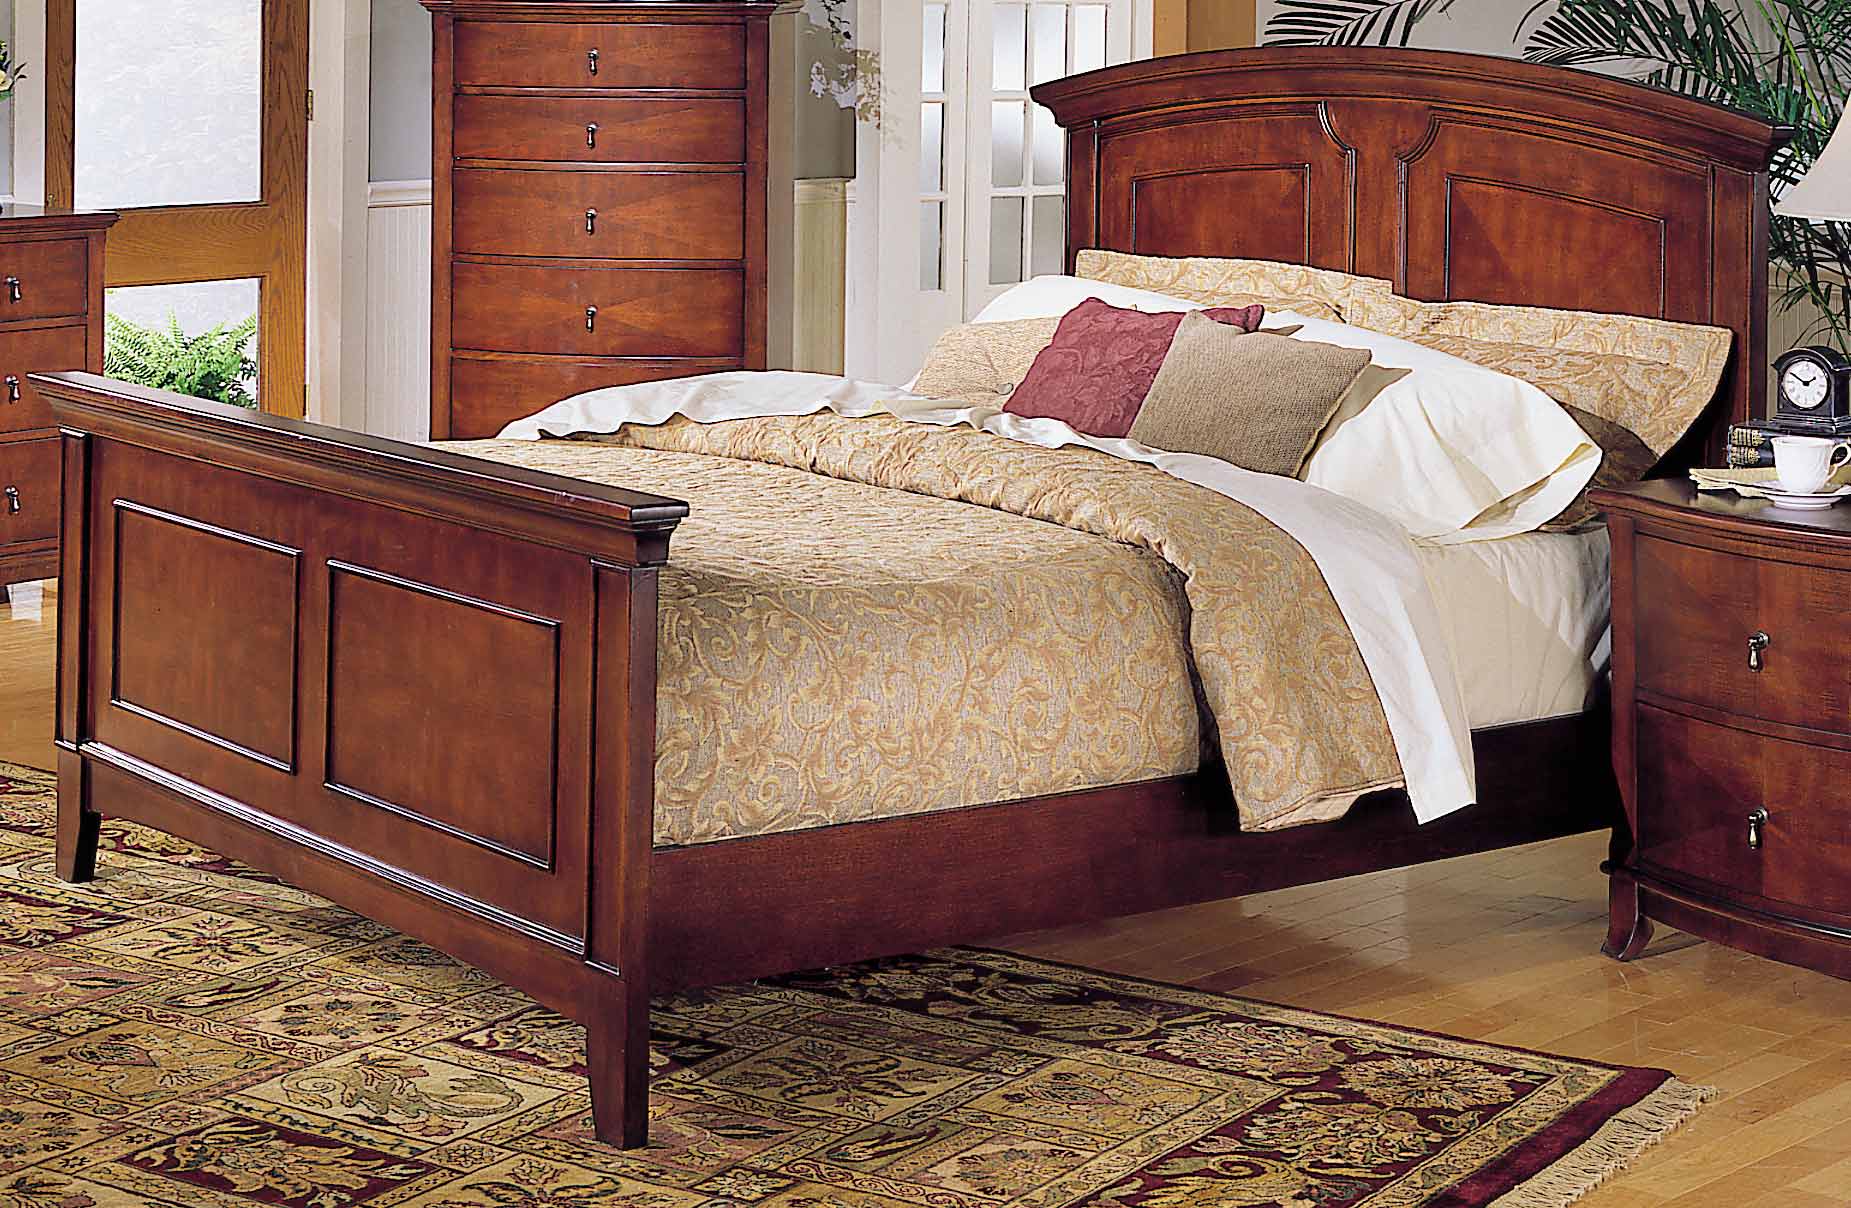 Homelegance Avalon Bed with Wood Rails